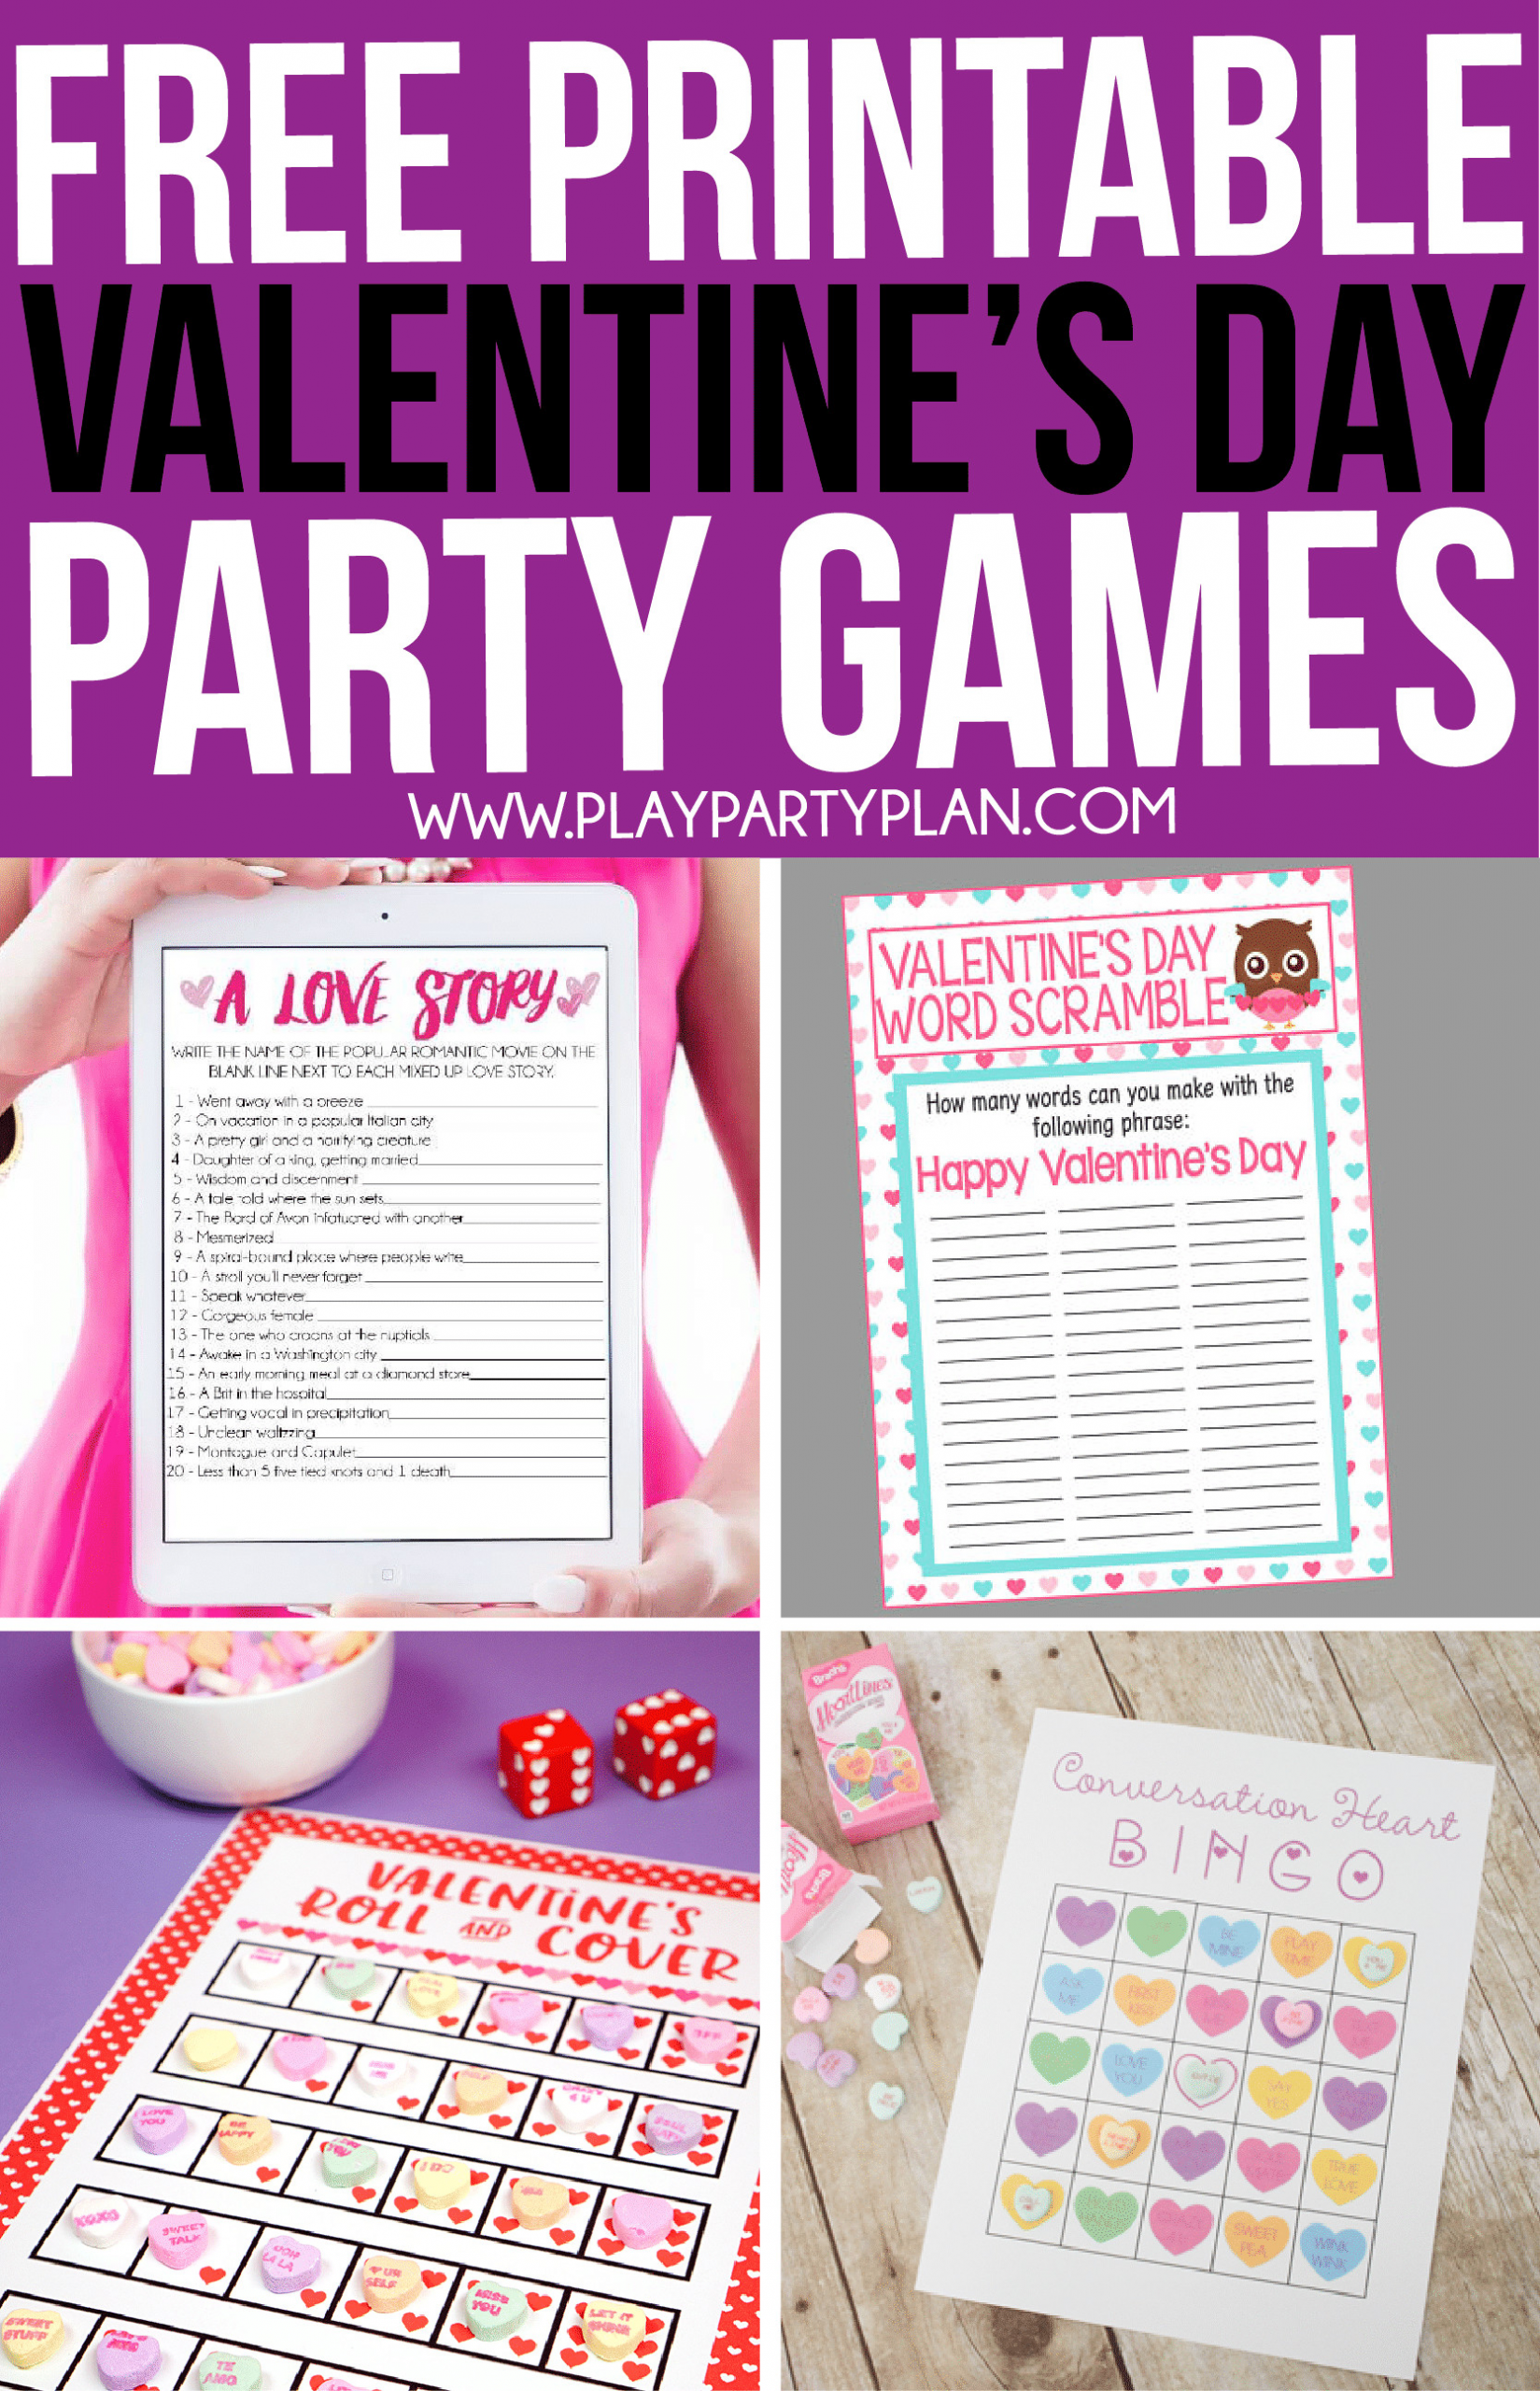 Valentines Day Party Games for Adults Lovely 35 Fun Valentine S Day Games Everyone Will Love Play